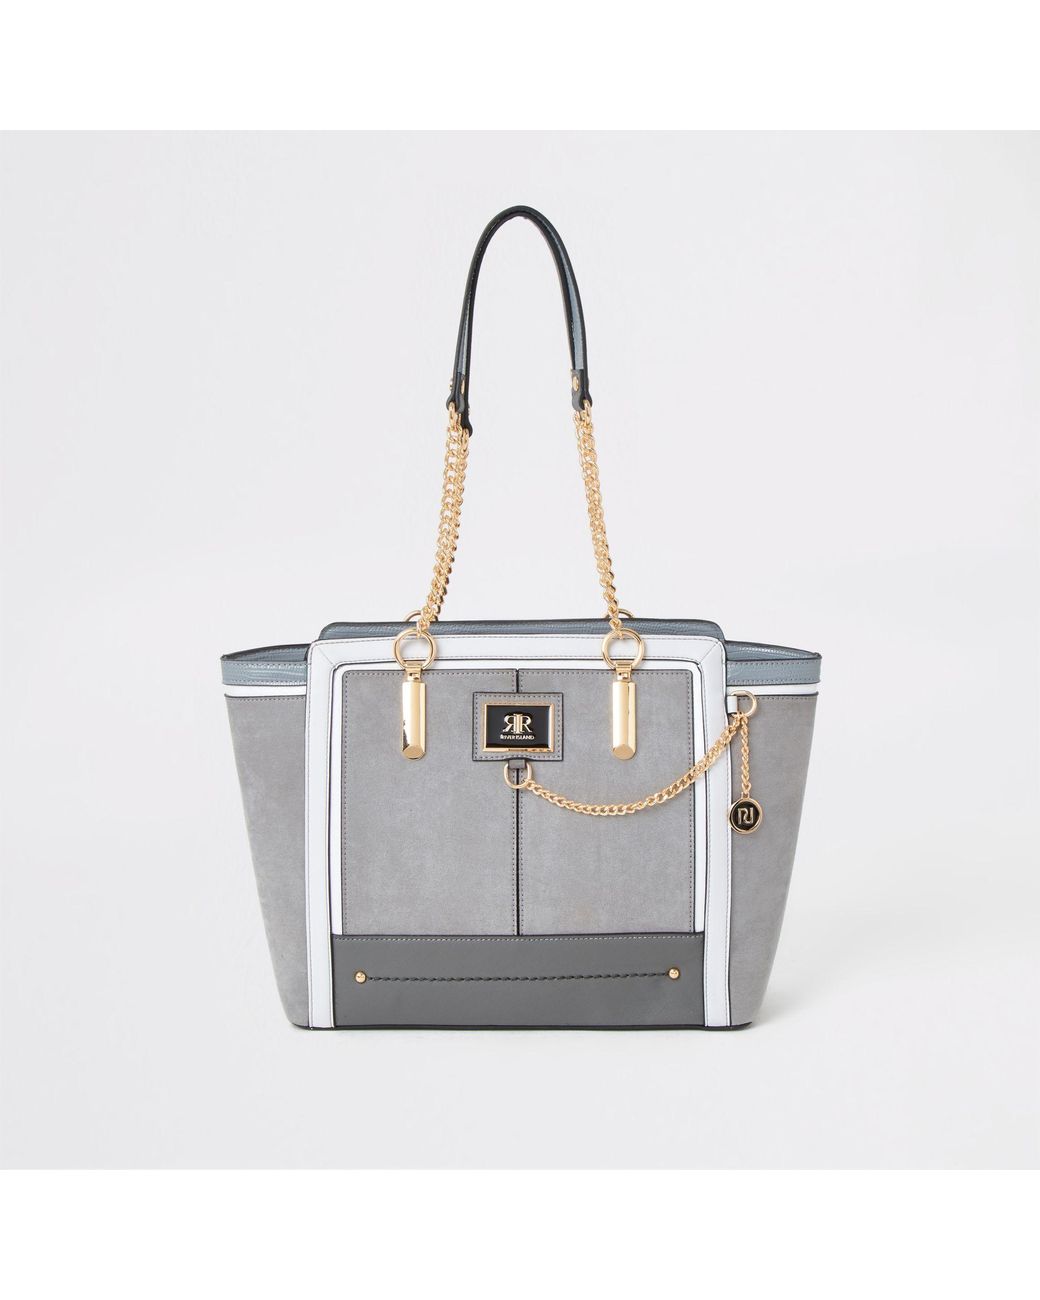 River Island Grey Chain Front Winged Tote Bag in Grey | Lyst Australia